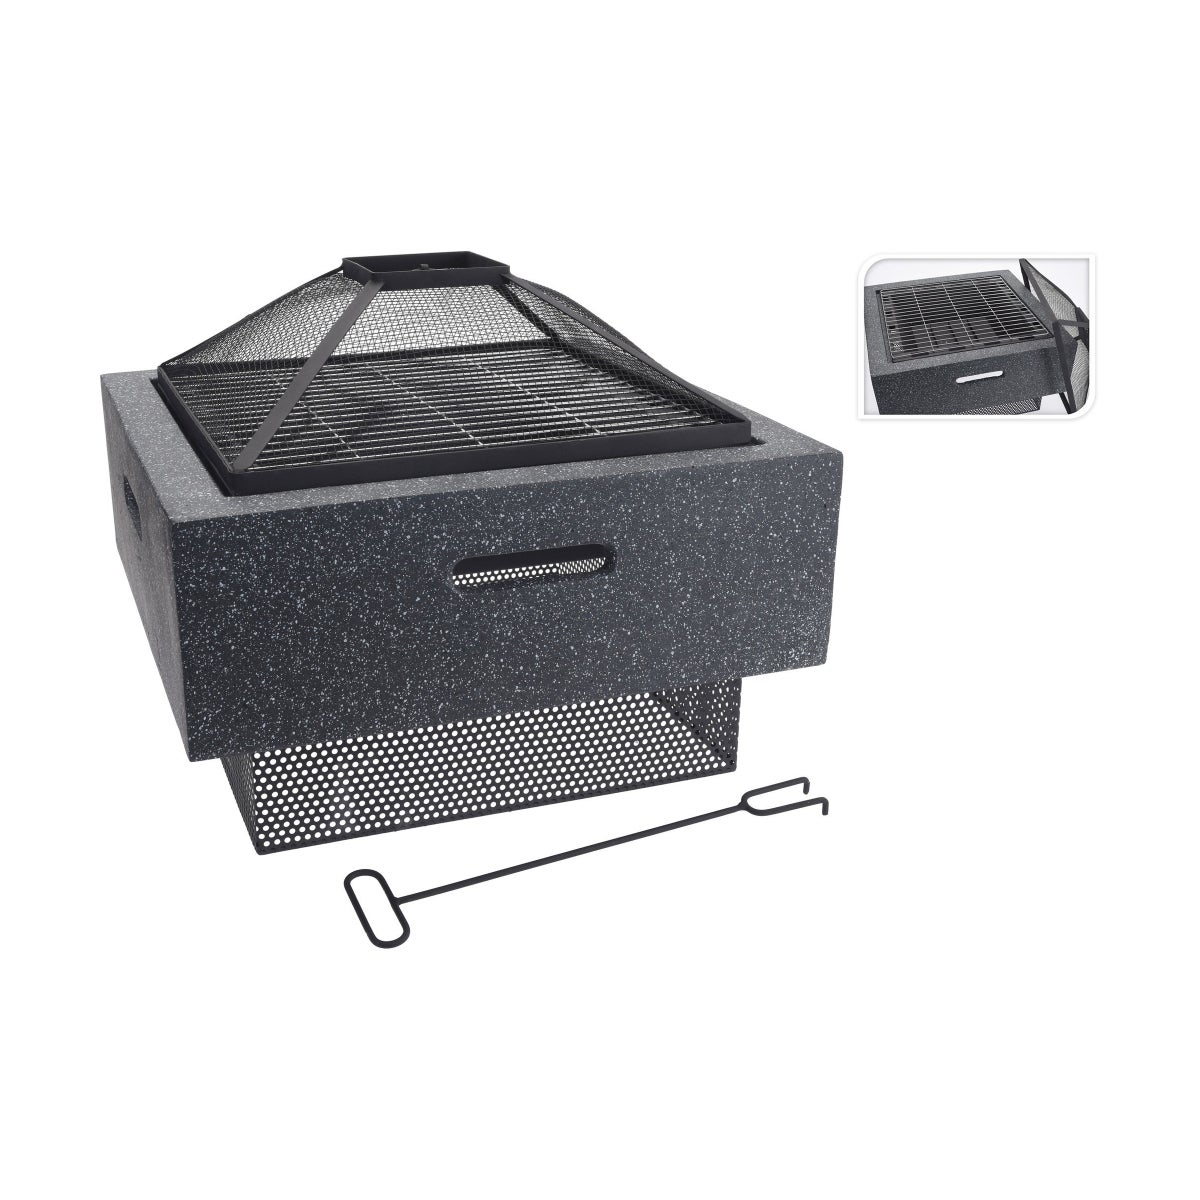 Fire Bowl Square Mgo Body With BBQ Rac